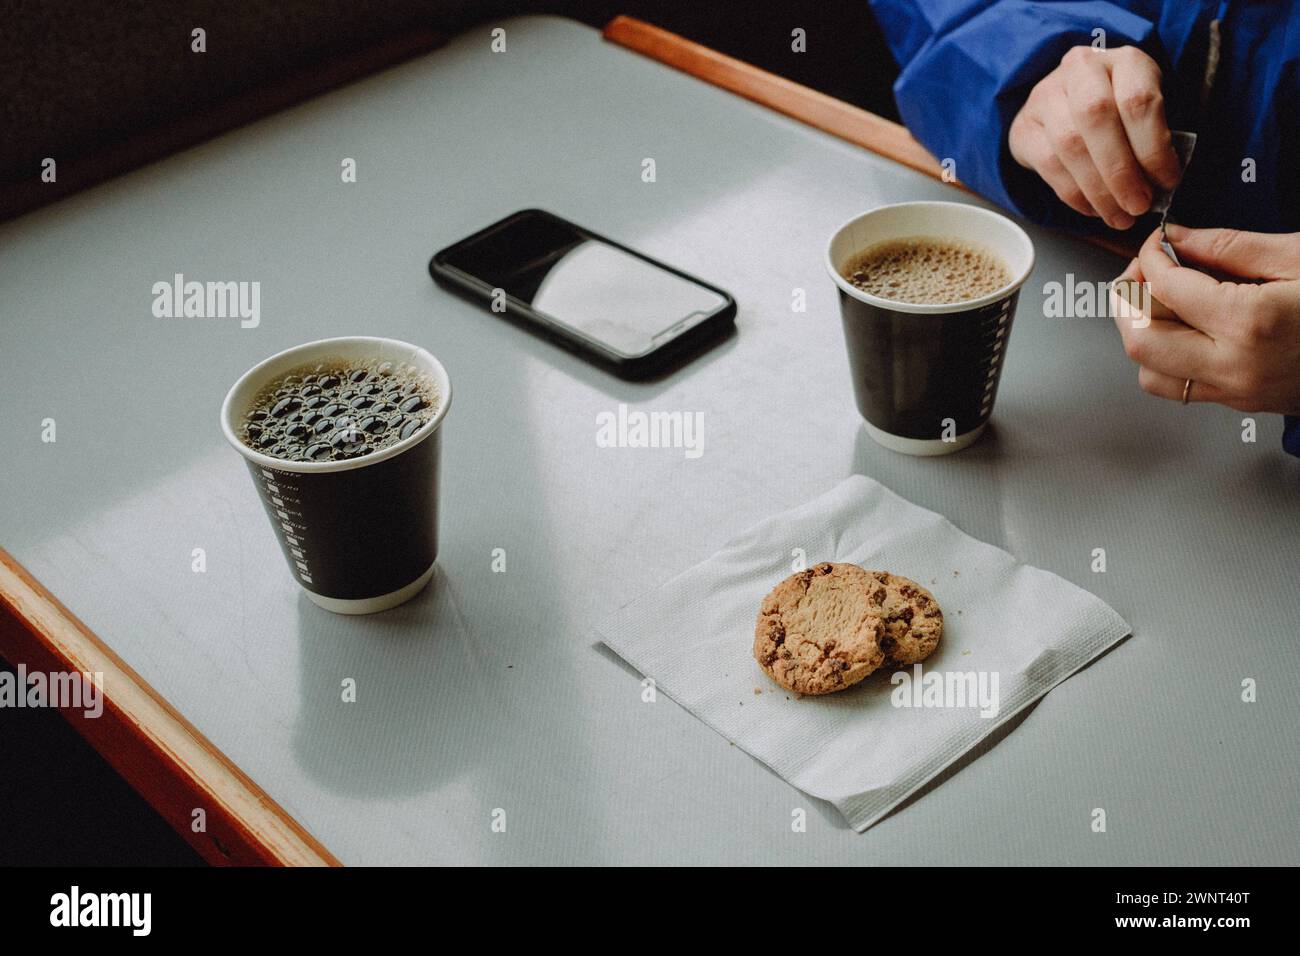 Coffee break at table with paper cups and cookies on napkin Stock Photo